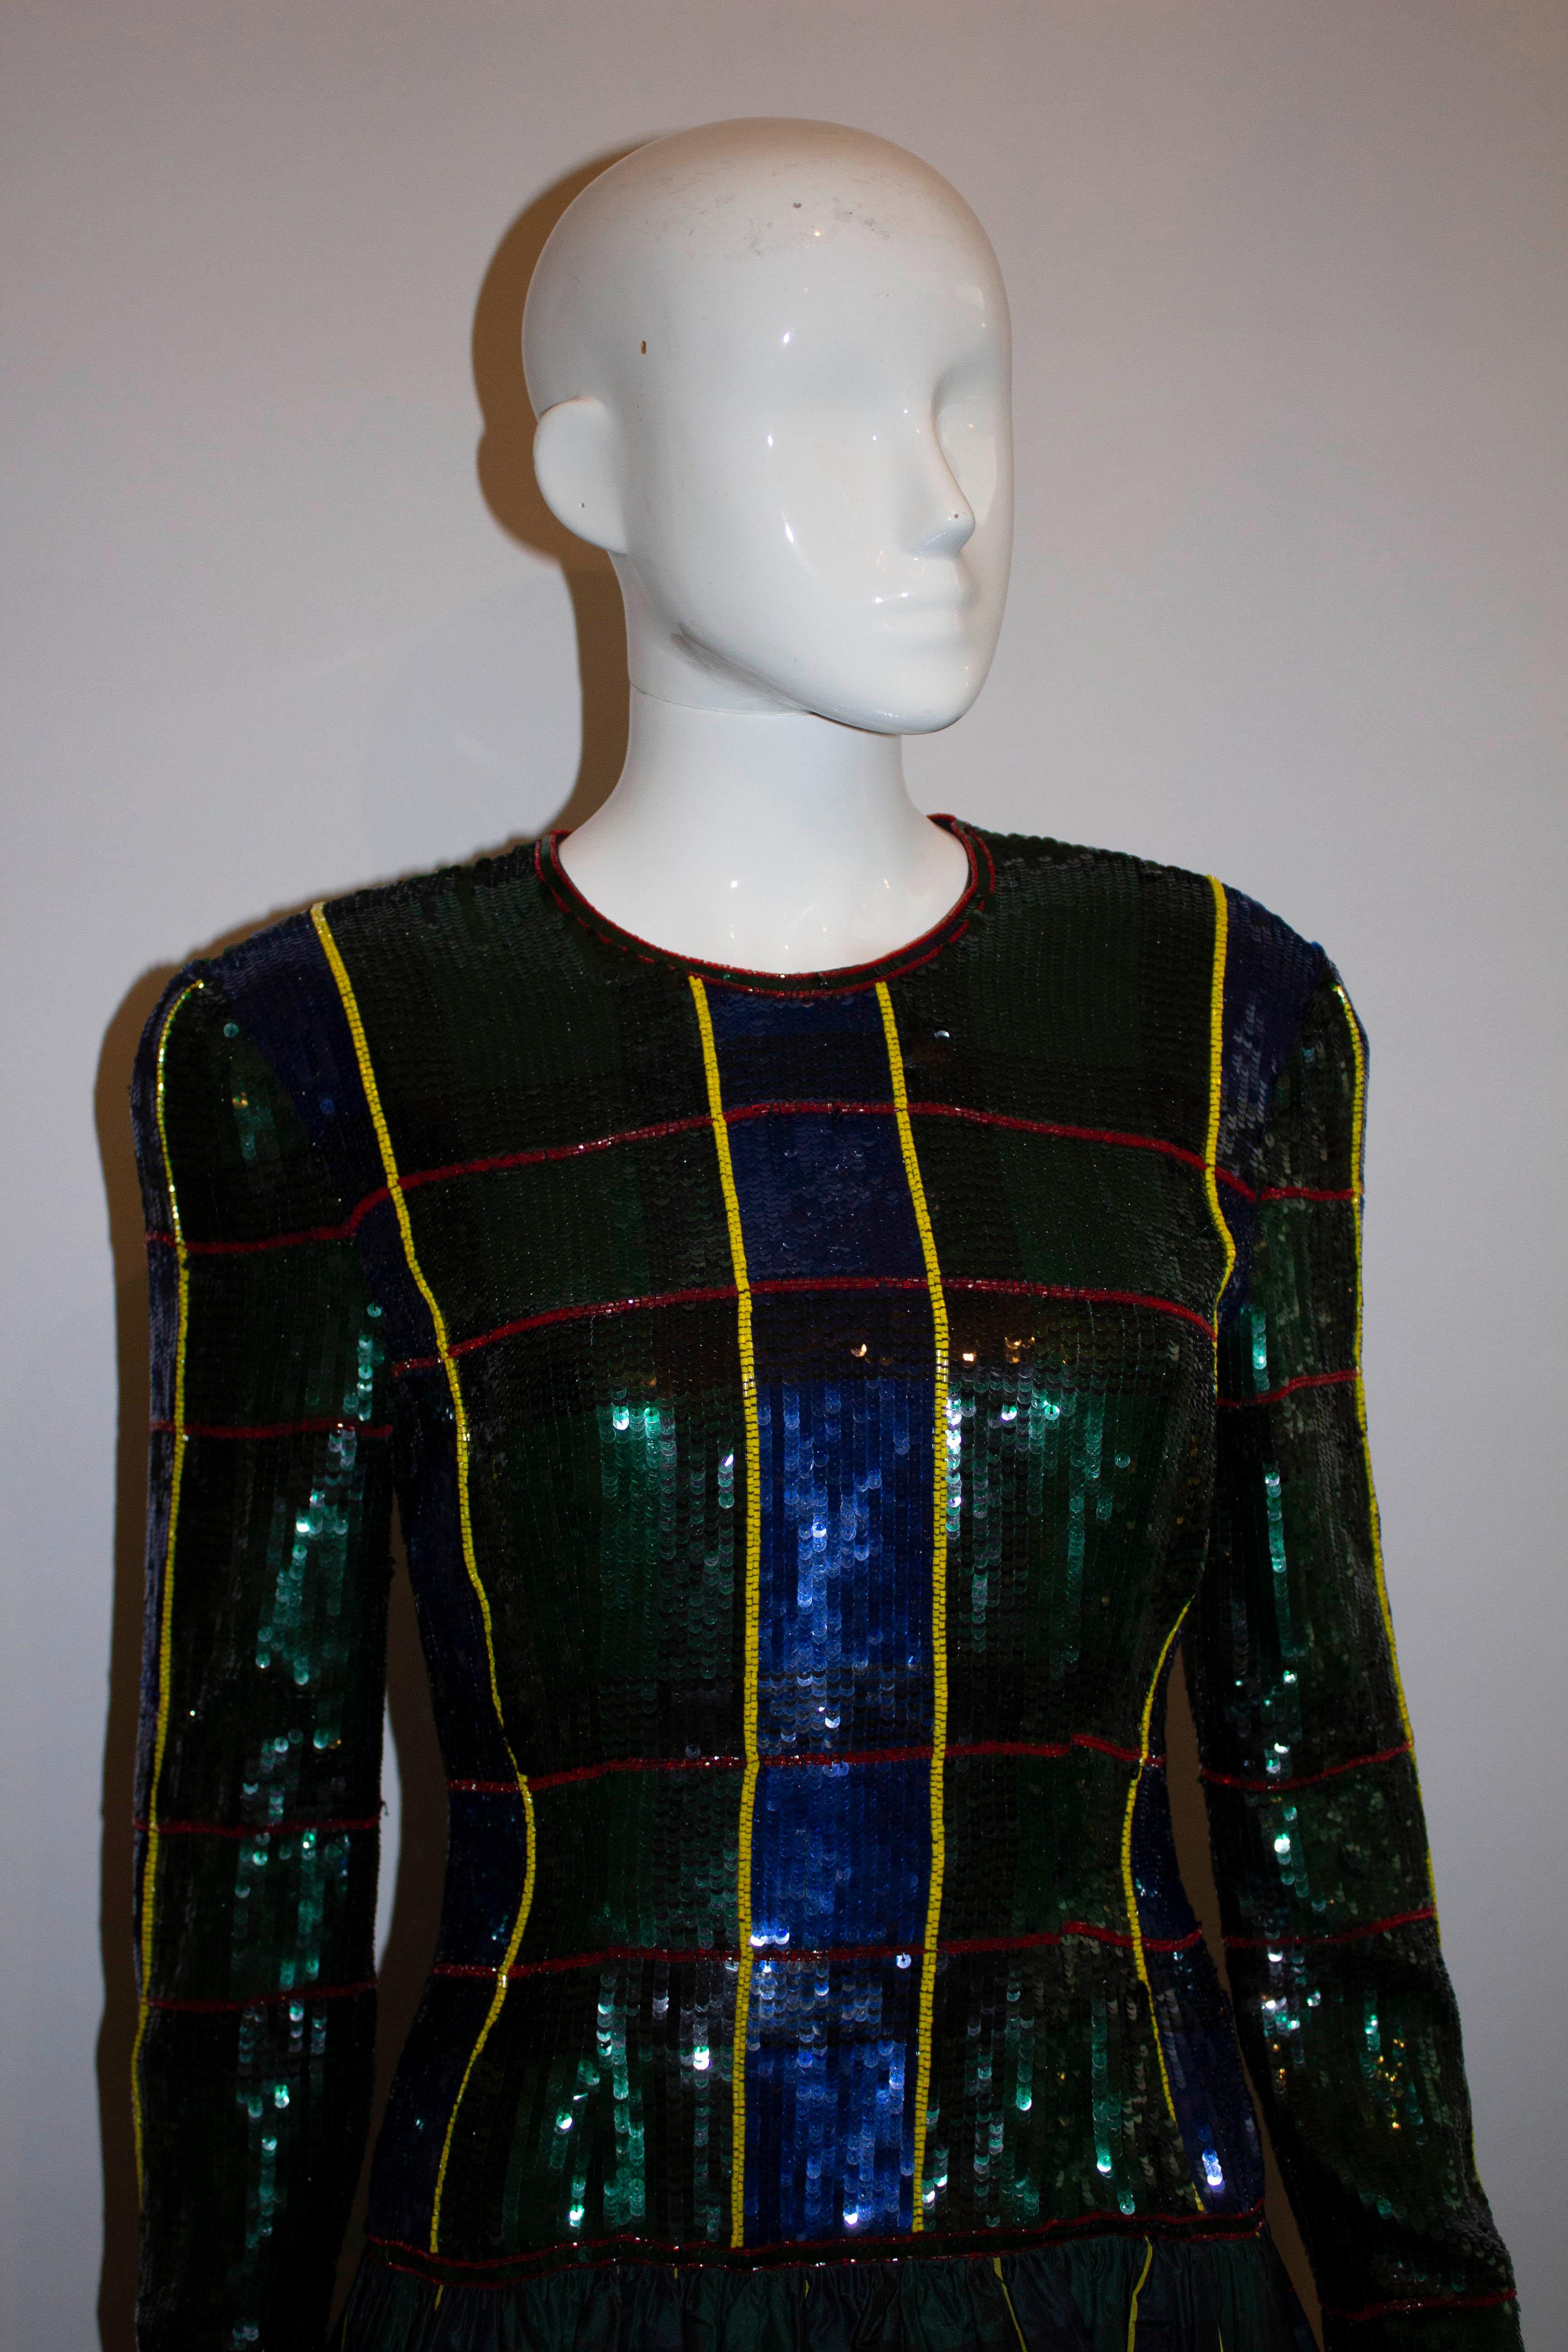 A stunning vintage evening gown by Escada Couture. The dress has a sequin top in a tartan design, with long sleaves with zip openings at the wrist.  The skirt is full with net underneath.

Measurements: Bust 36'', length 42'' plus 1 1/2'' hem. 